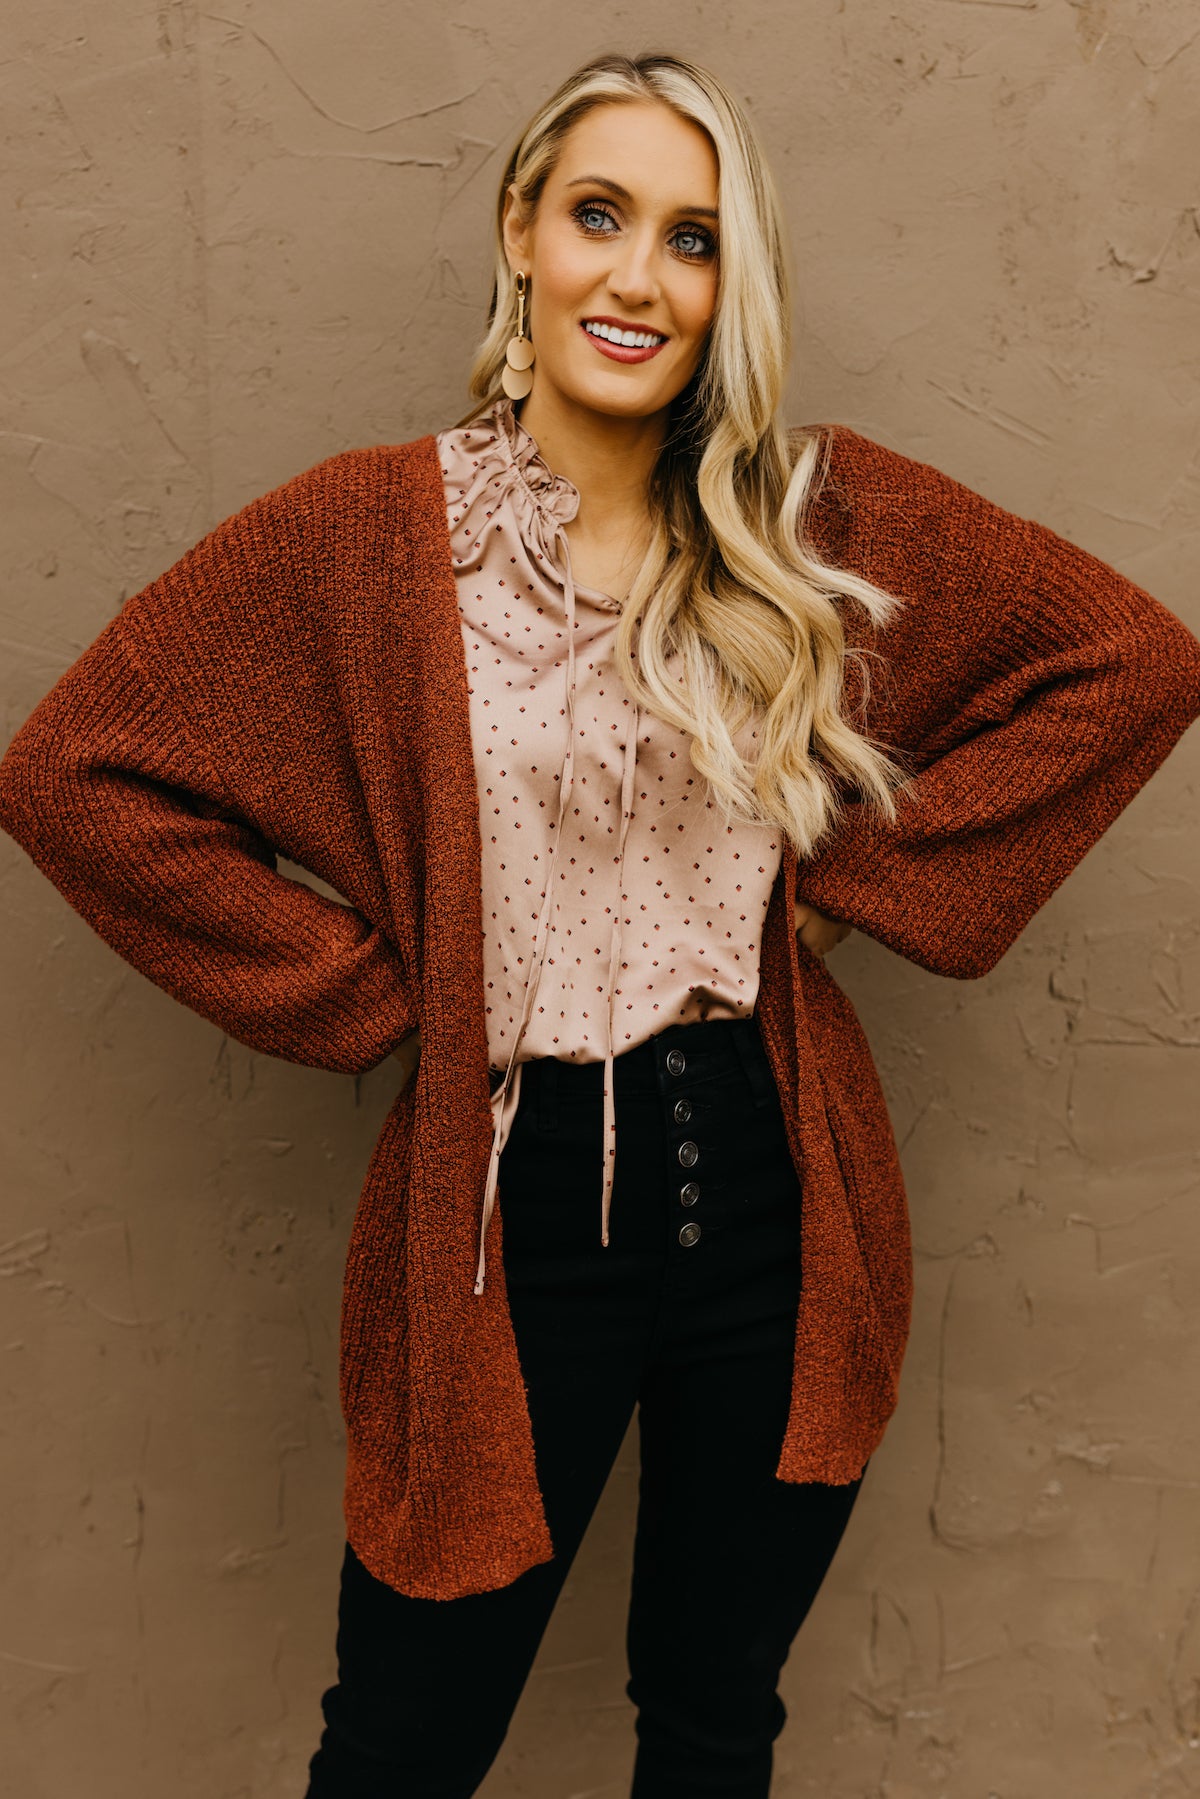 The Bodie Peppered Braid Back Cardigan